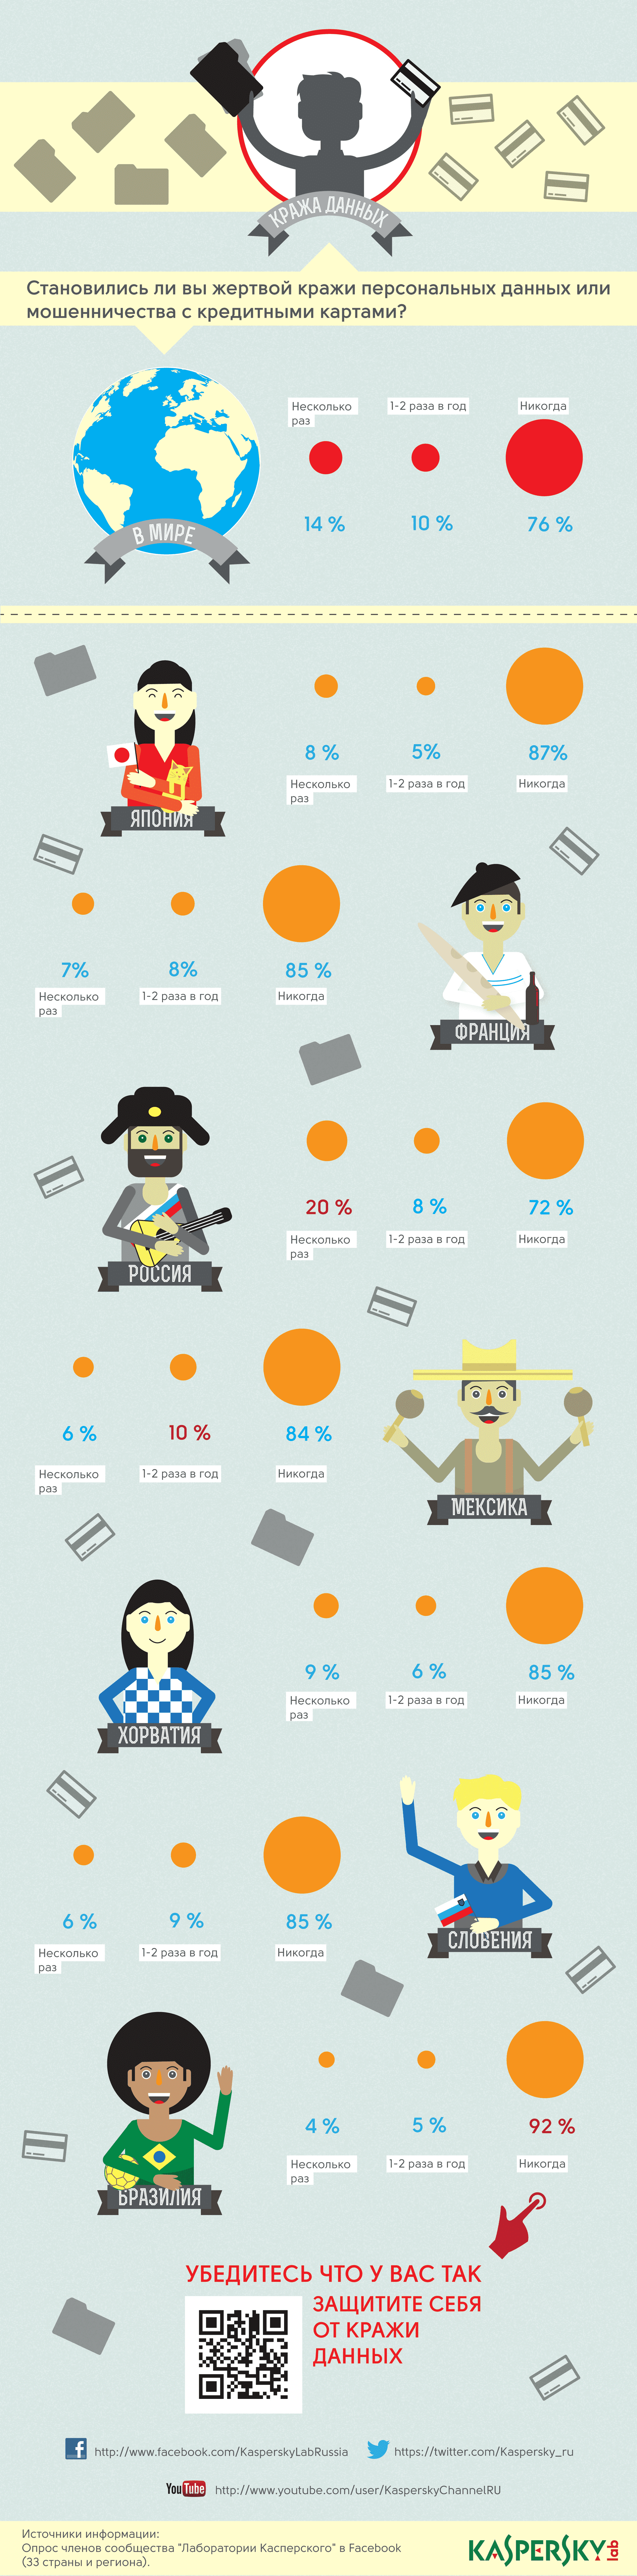 Financial Data Infographic